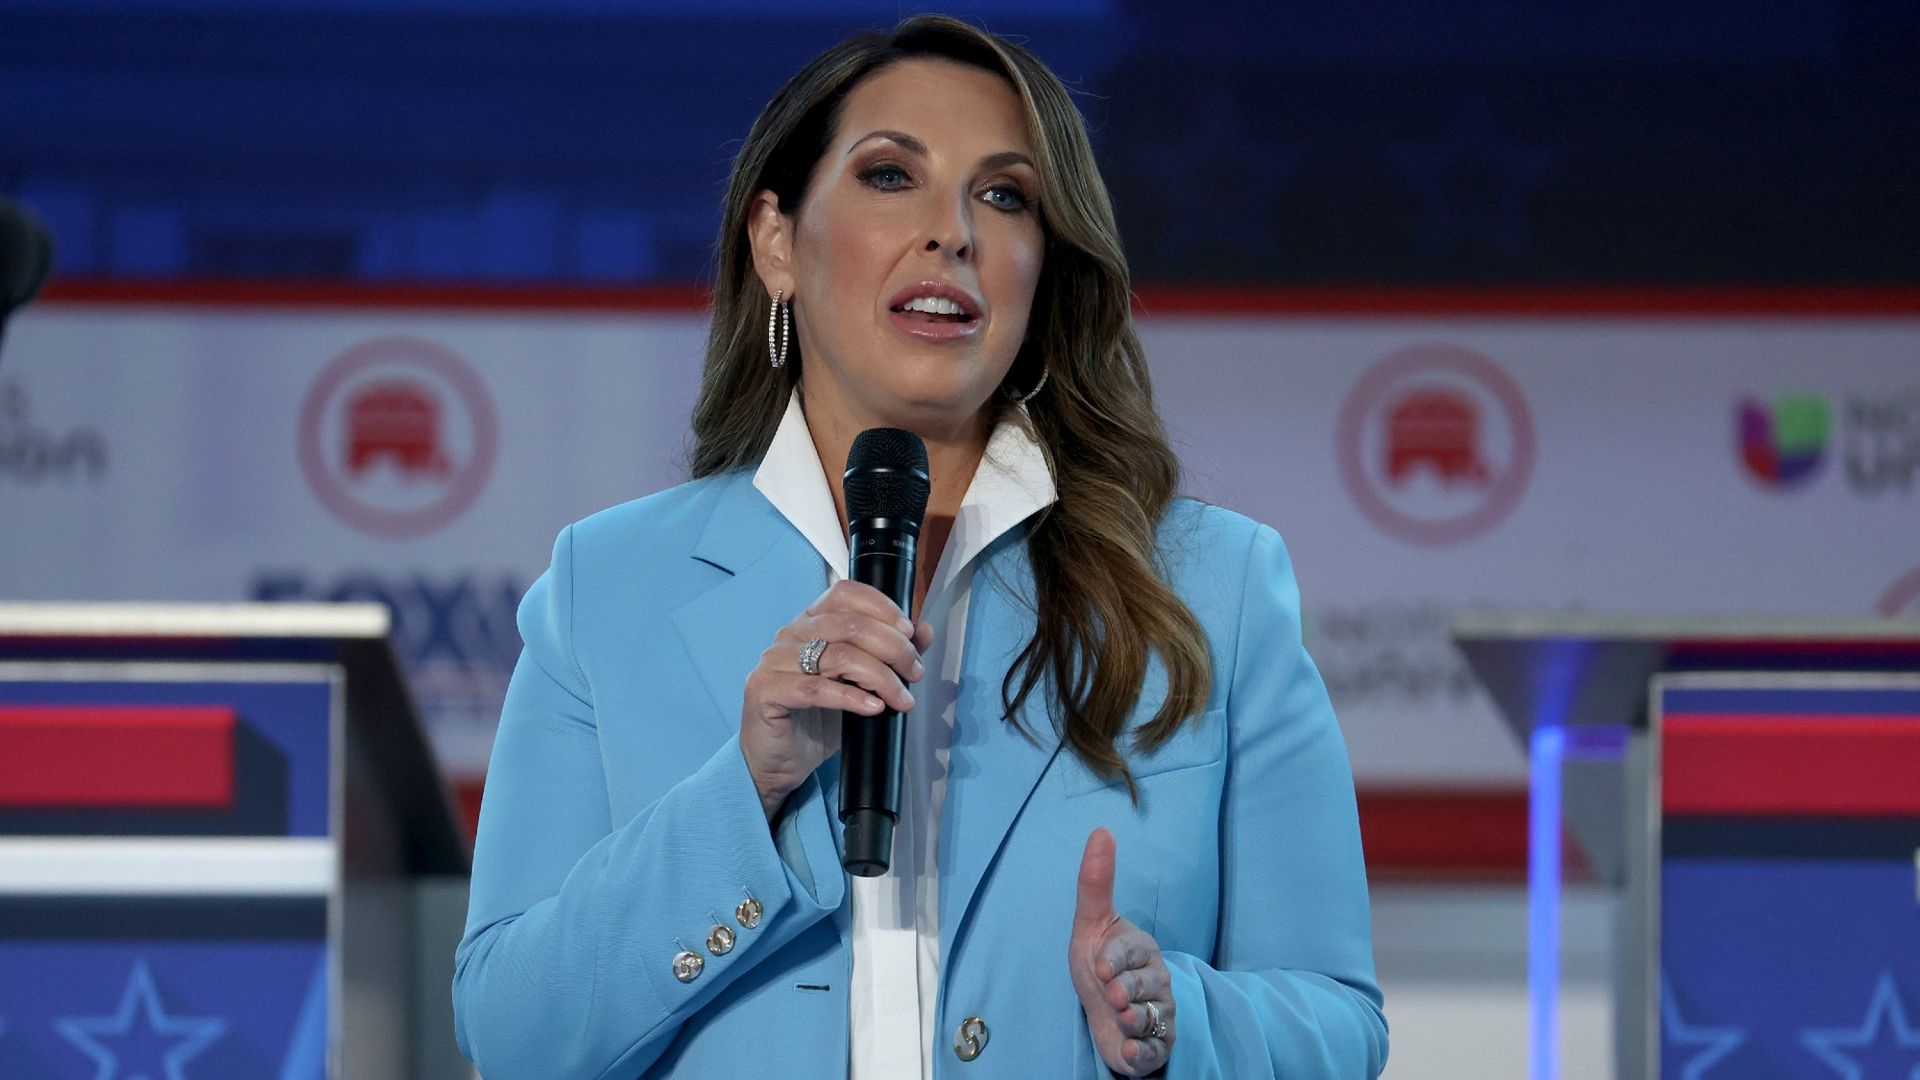 ronna mcdaniel, the former rnc chair and departed nbc analyst, may be signaling a shift in corporate media